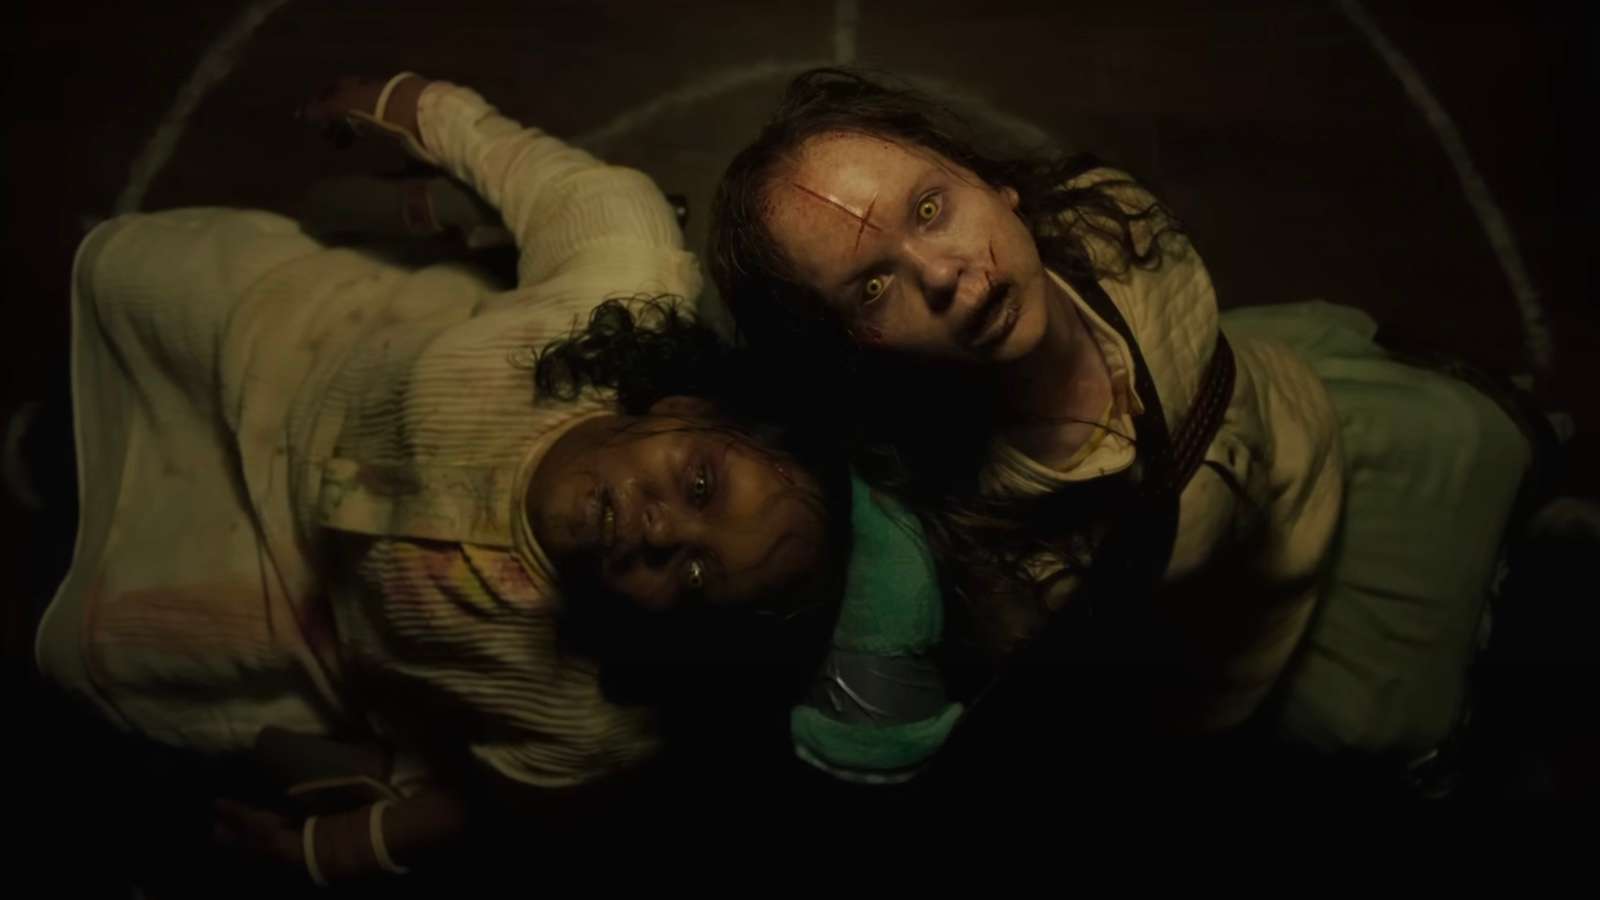 Lidya Jewett and Olivia O'Neill as Angela and Katherine in The Exorcist: Believer